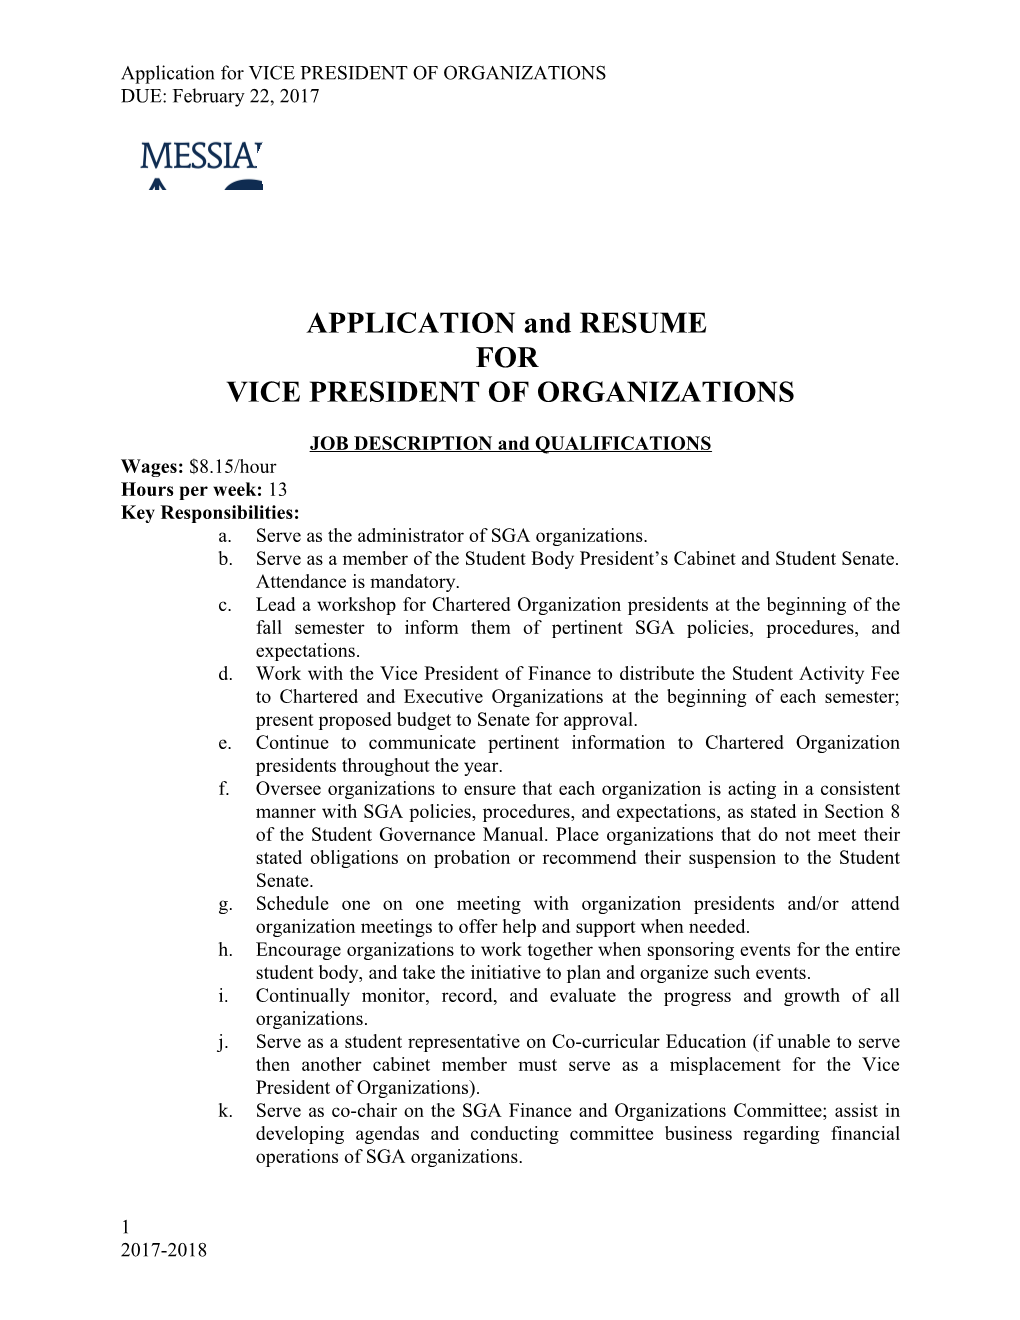 Application for VICE PRESIDENT of ORGANIZATIONS